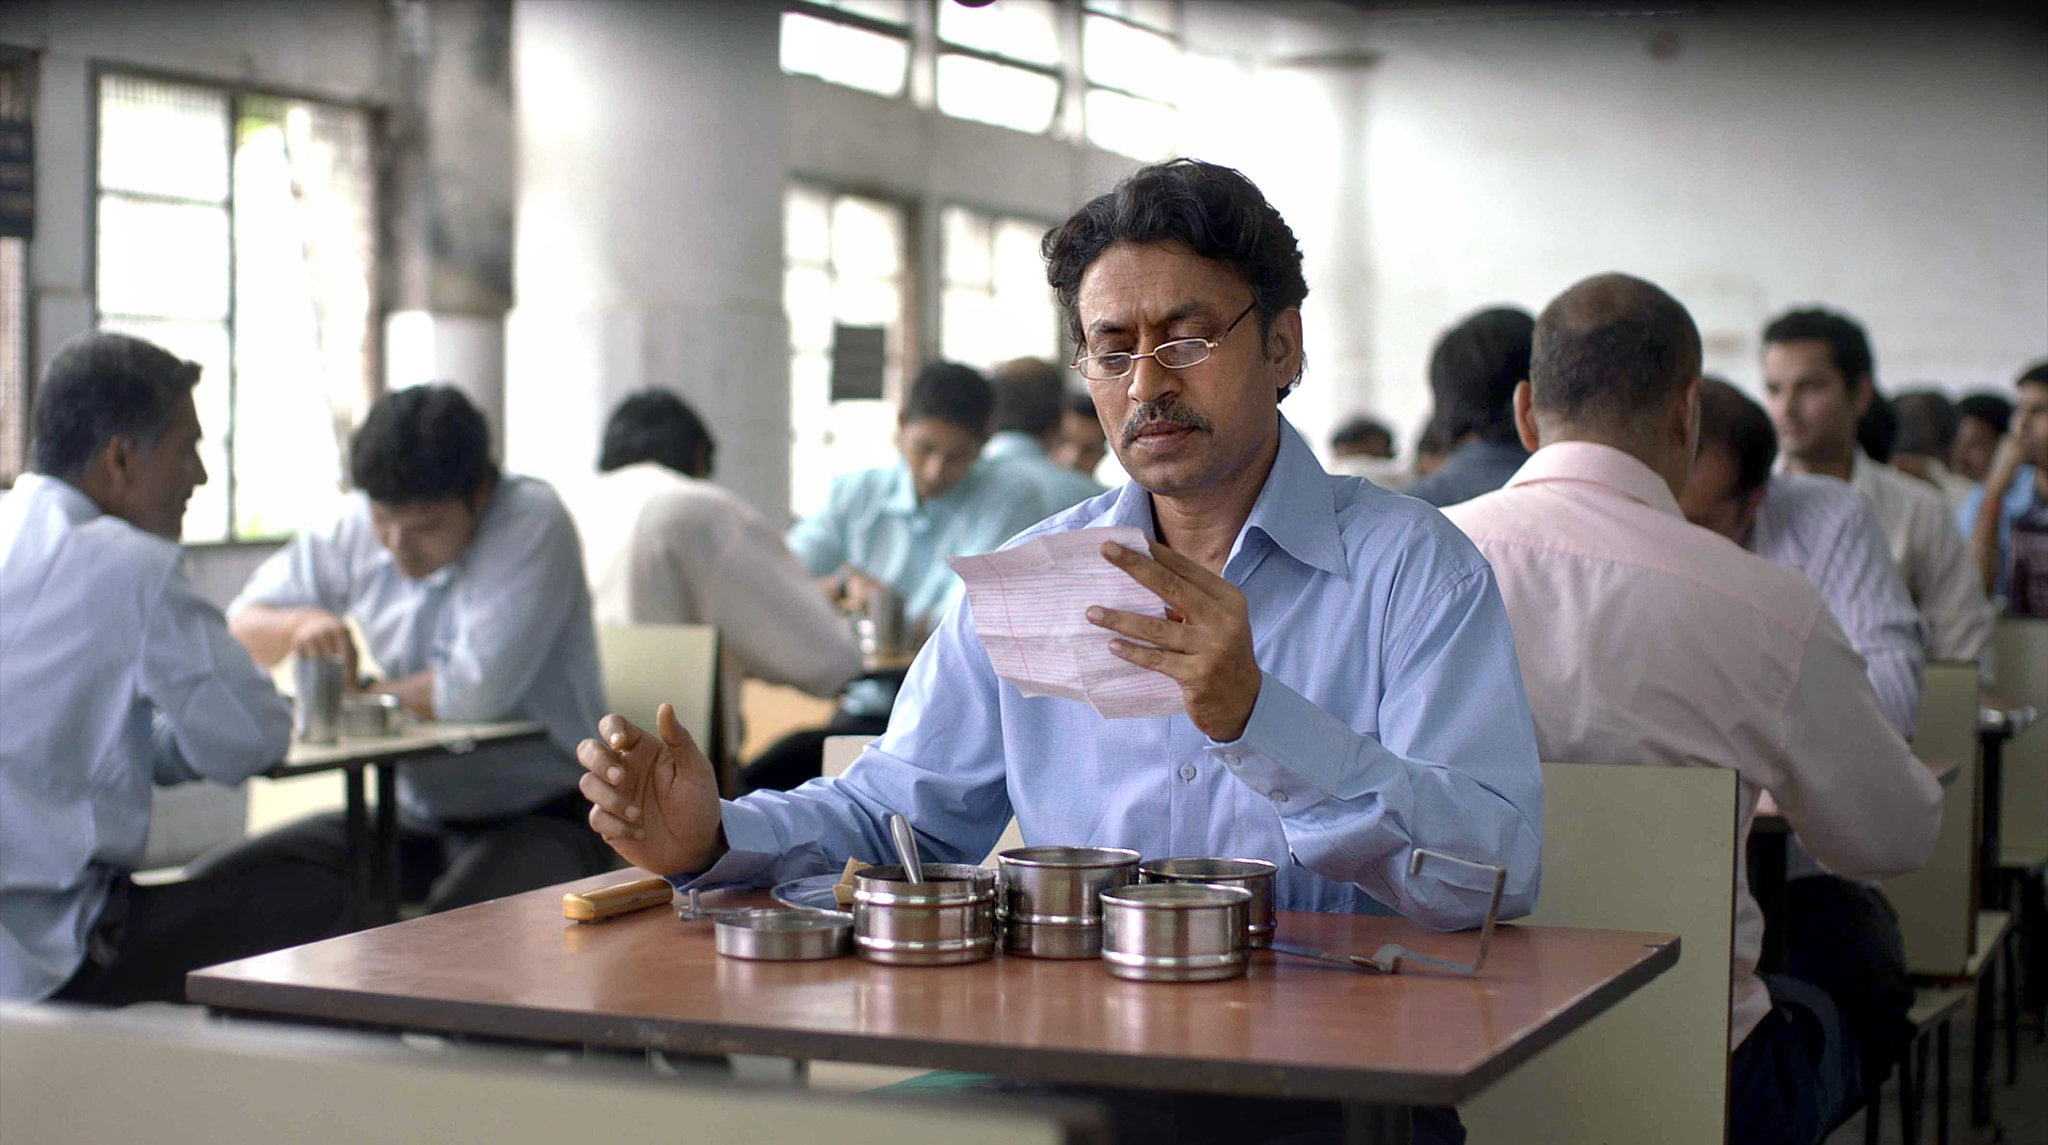 The Lunchbox's omission led to director Ritesh Batra writing an angry letter to the jury.